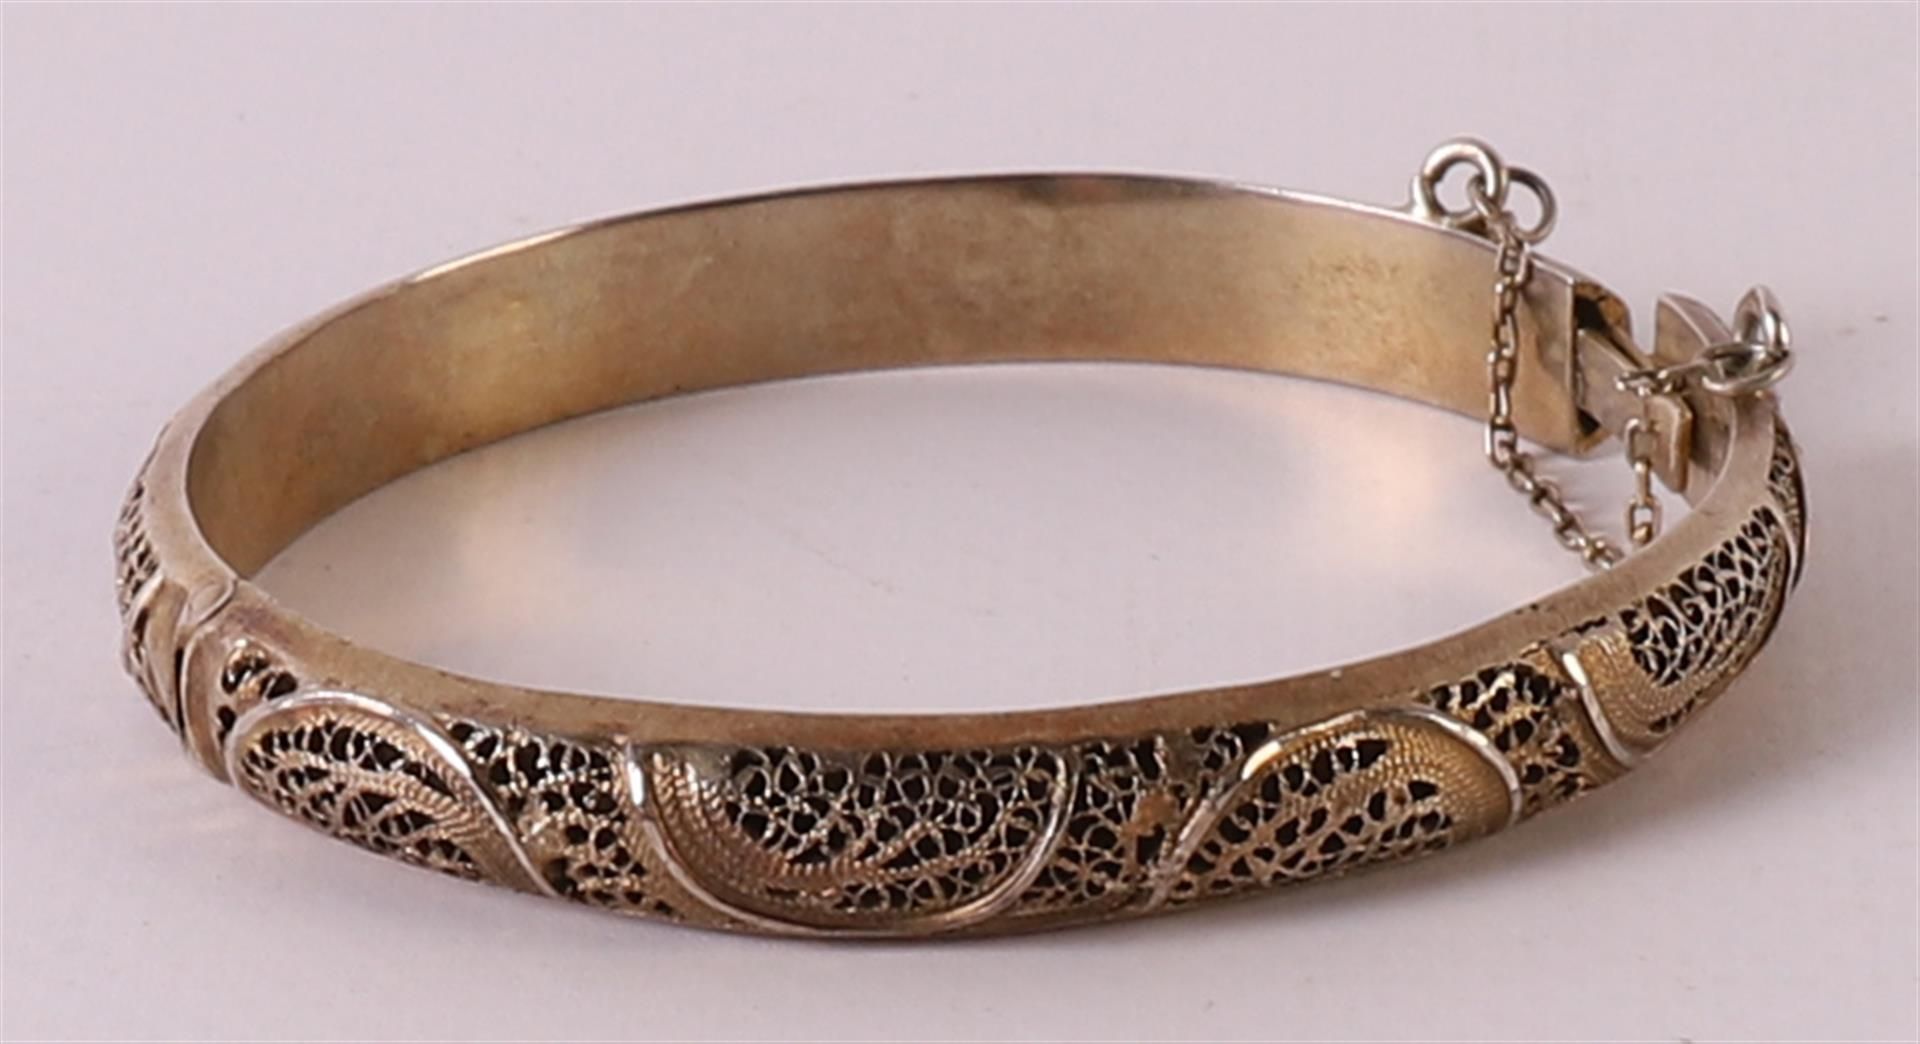 A gold-plated silver stiff bracelet with filigree decor